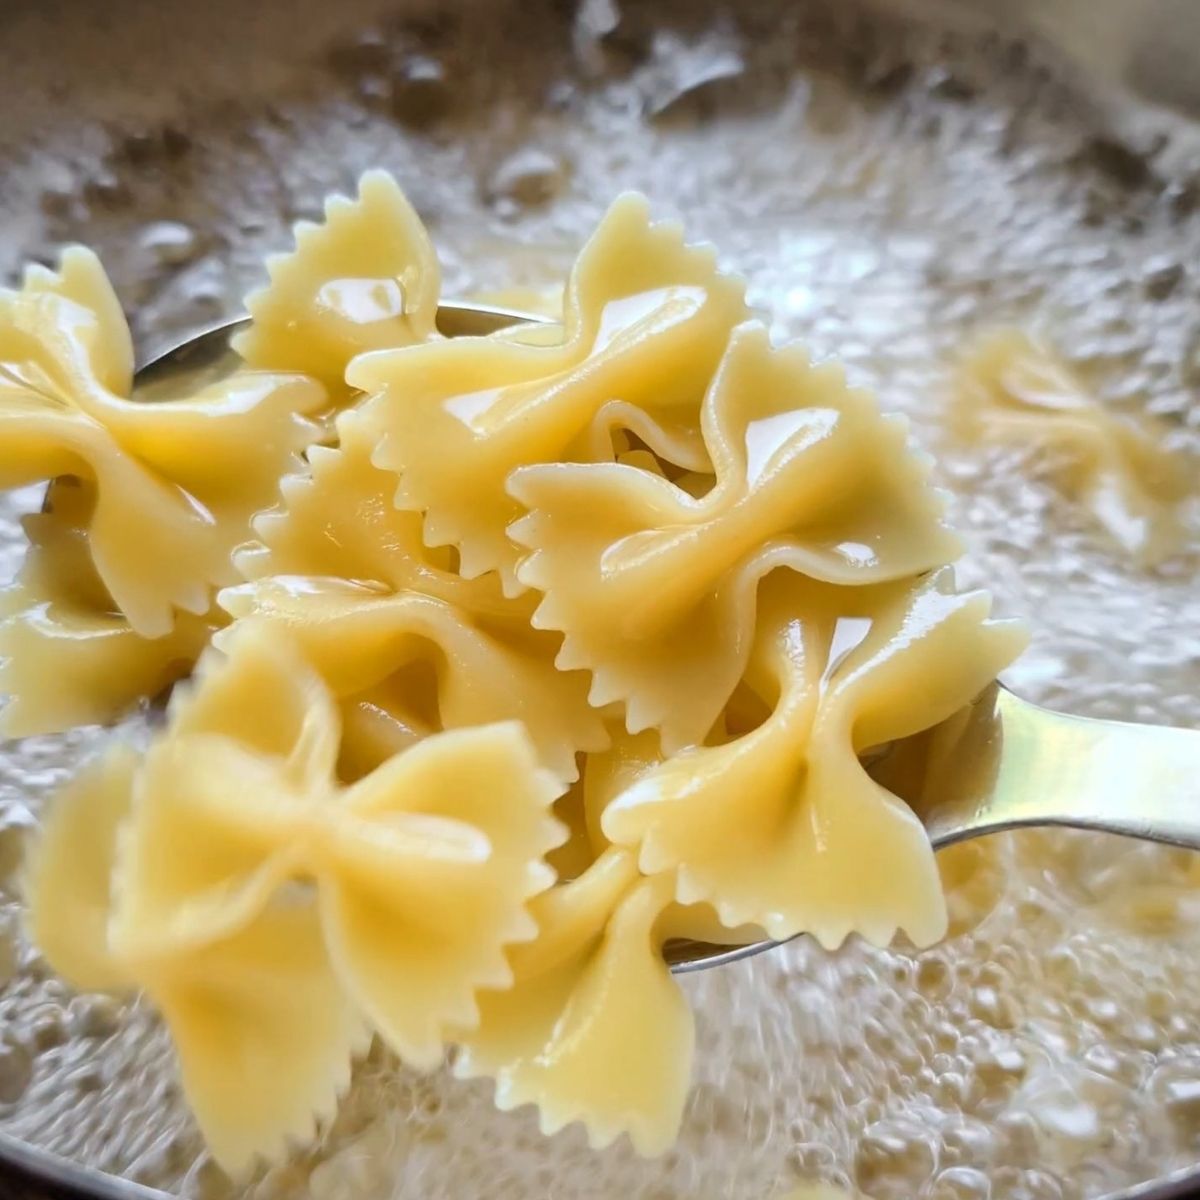 farfalle bowtie noodles cooking in boiling water for pasta salad.